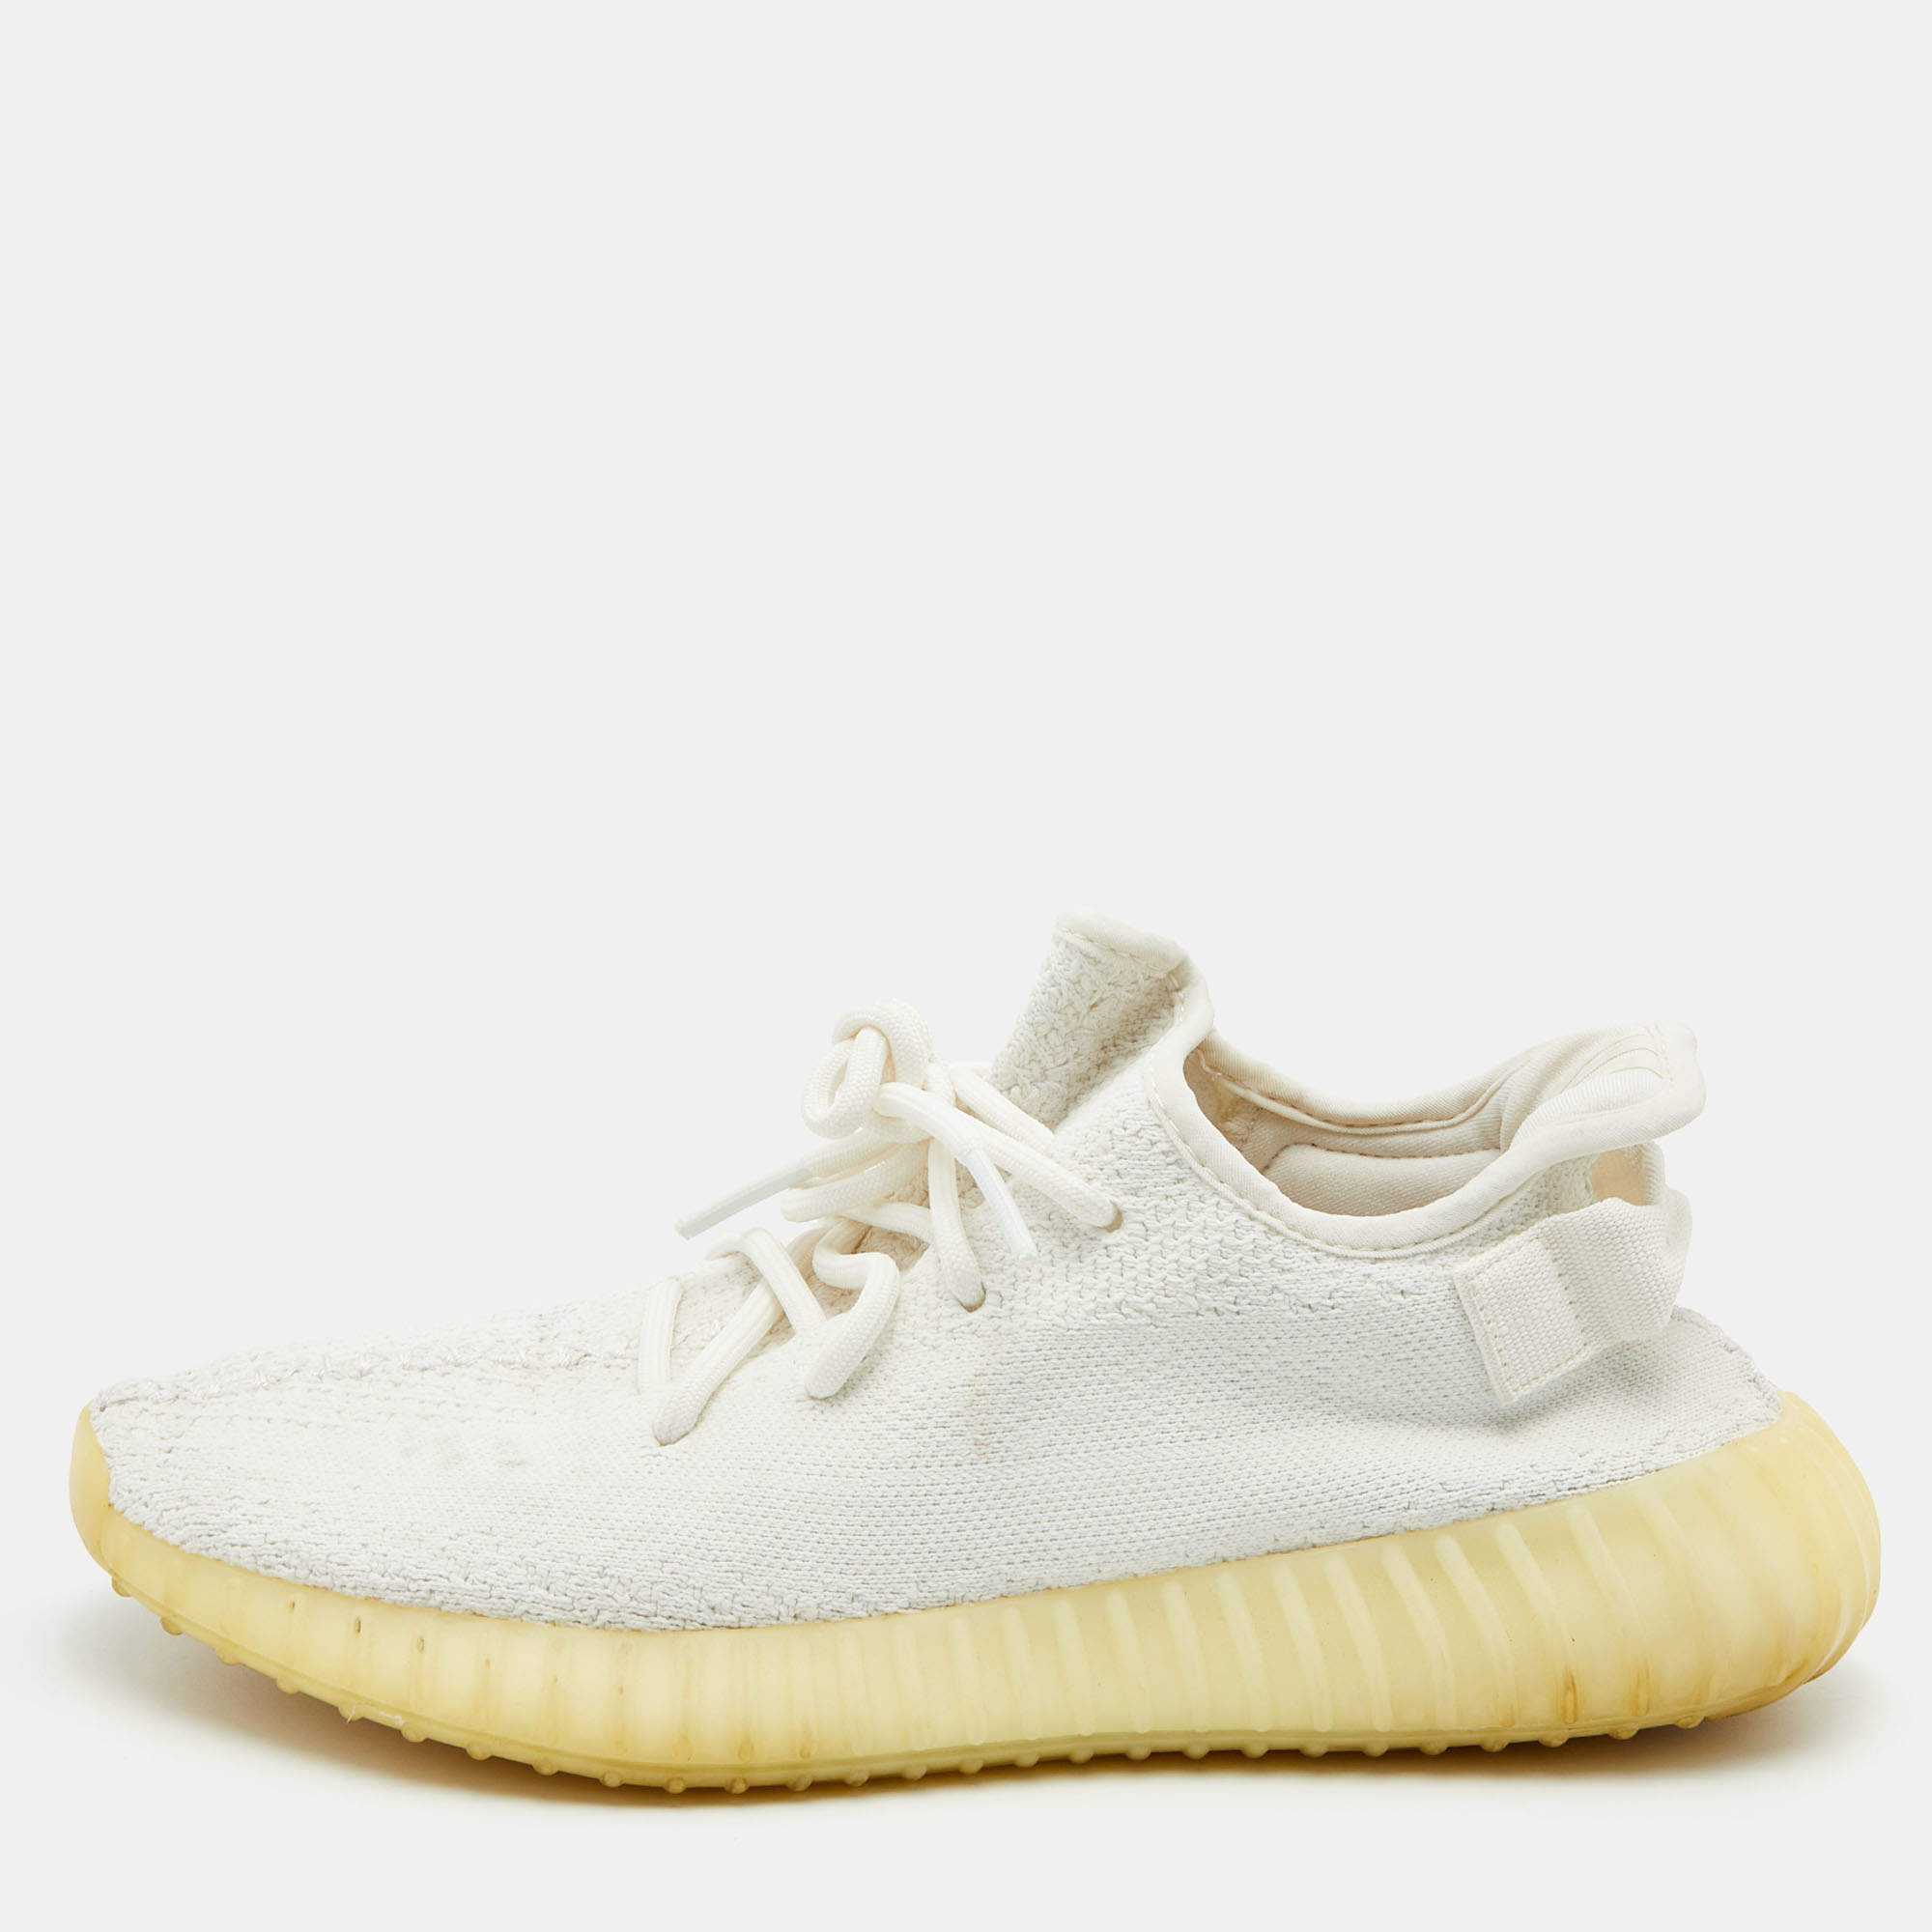 Yeezy x Adidas White Knit Fabric Boost 350 V2 Cream Low Top Sneakers Size 42